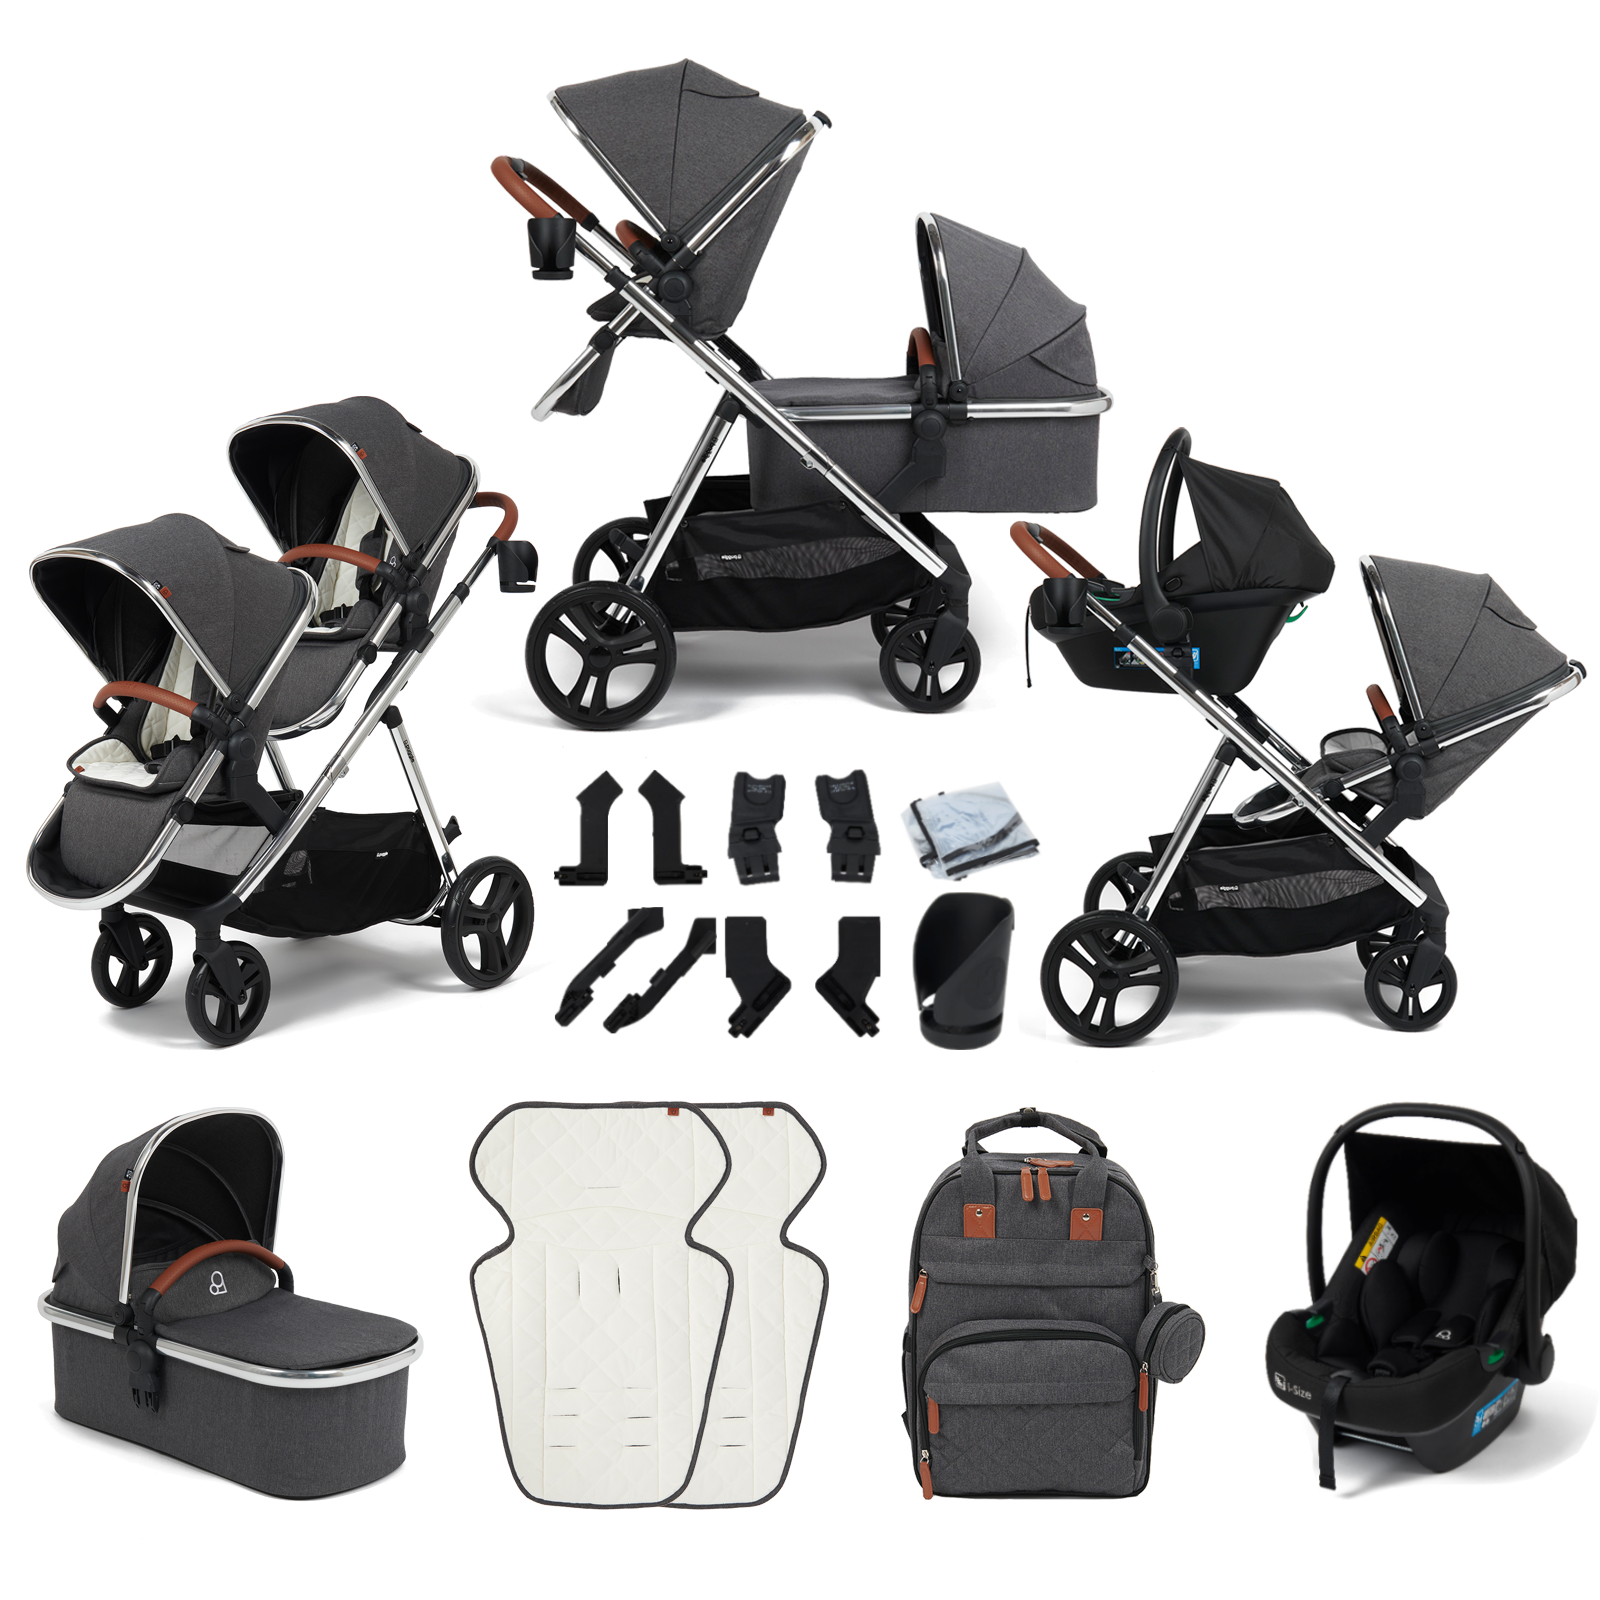 Puggle Memphis 3-in-1 Duo i-Size Double Travel System - Platinum Grey (Chrome Frame)